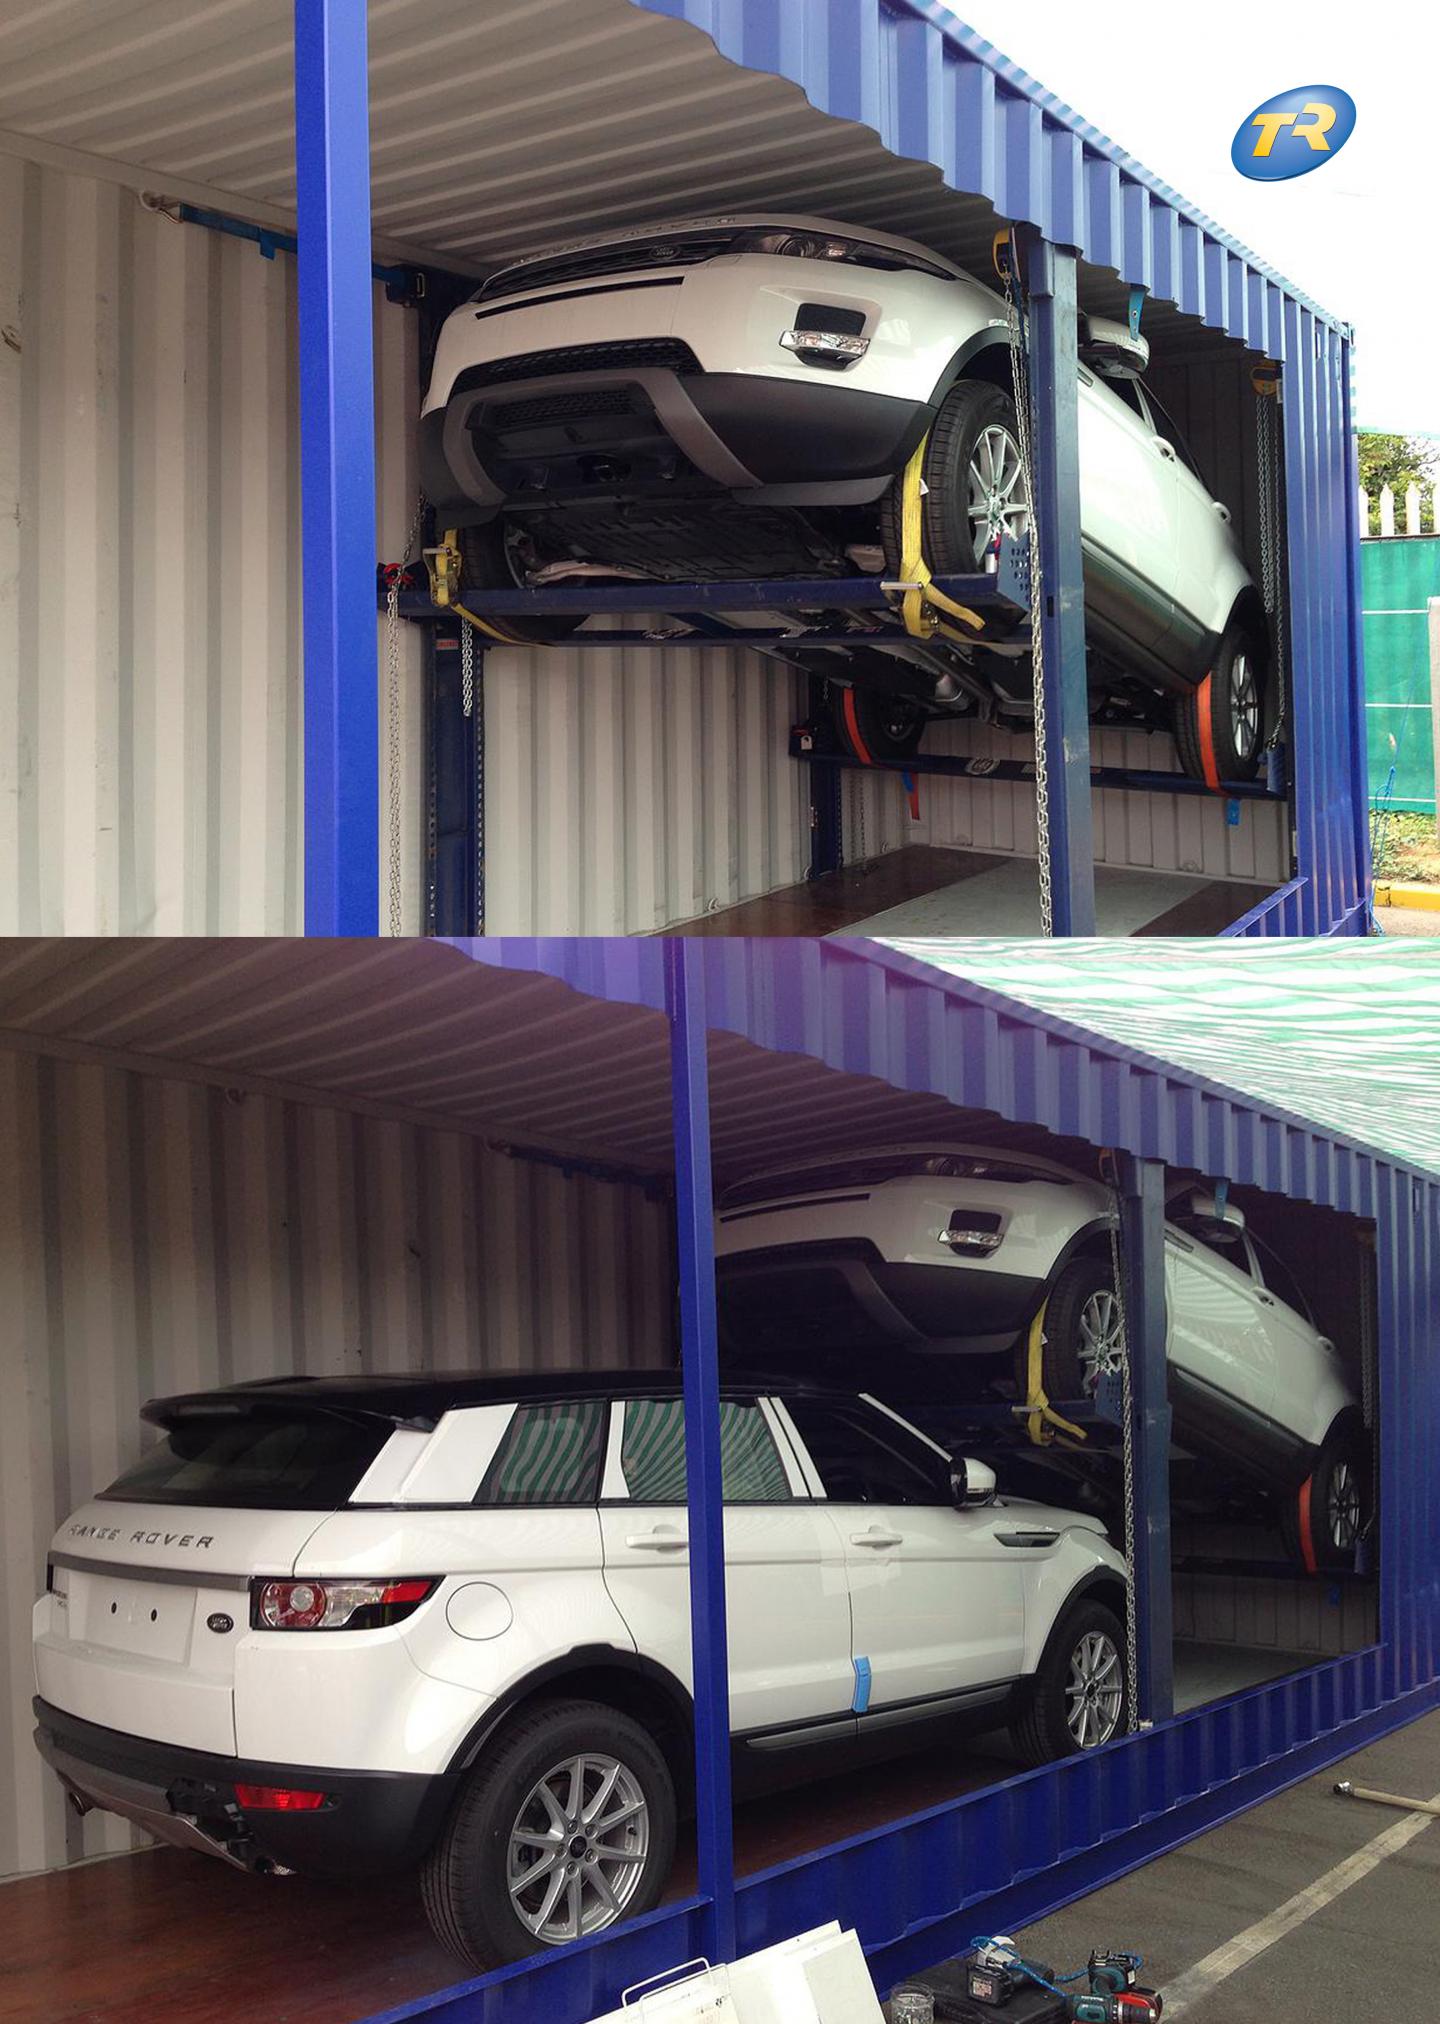 Cars in Containers & Car Racking Systems: The Transrak Blog (3)